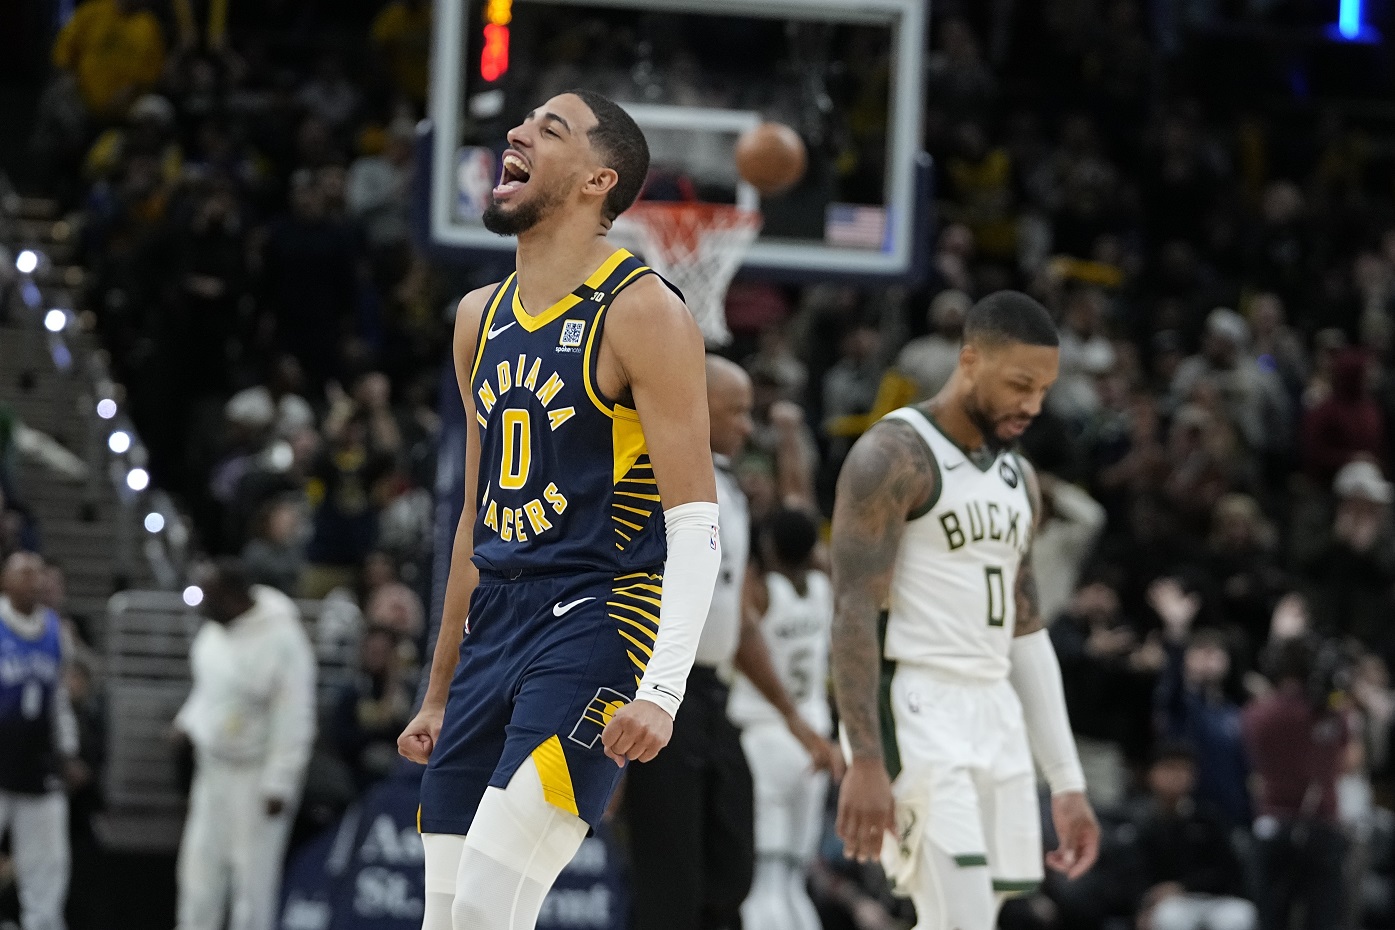 Oshkosh native Haliburton has 31 points, 12 assists in leading Pacers over Bucks for 2nd straight time